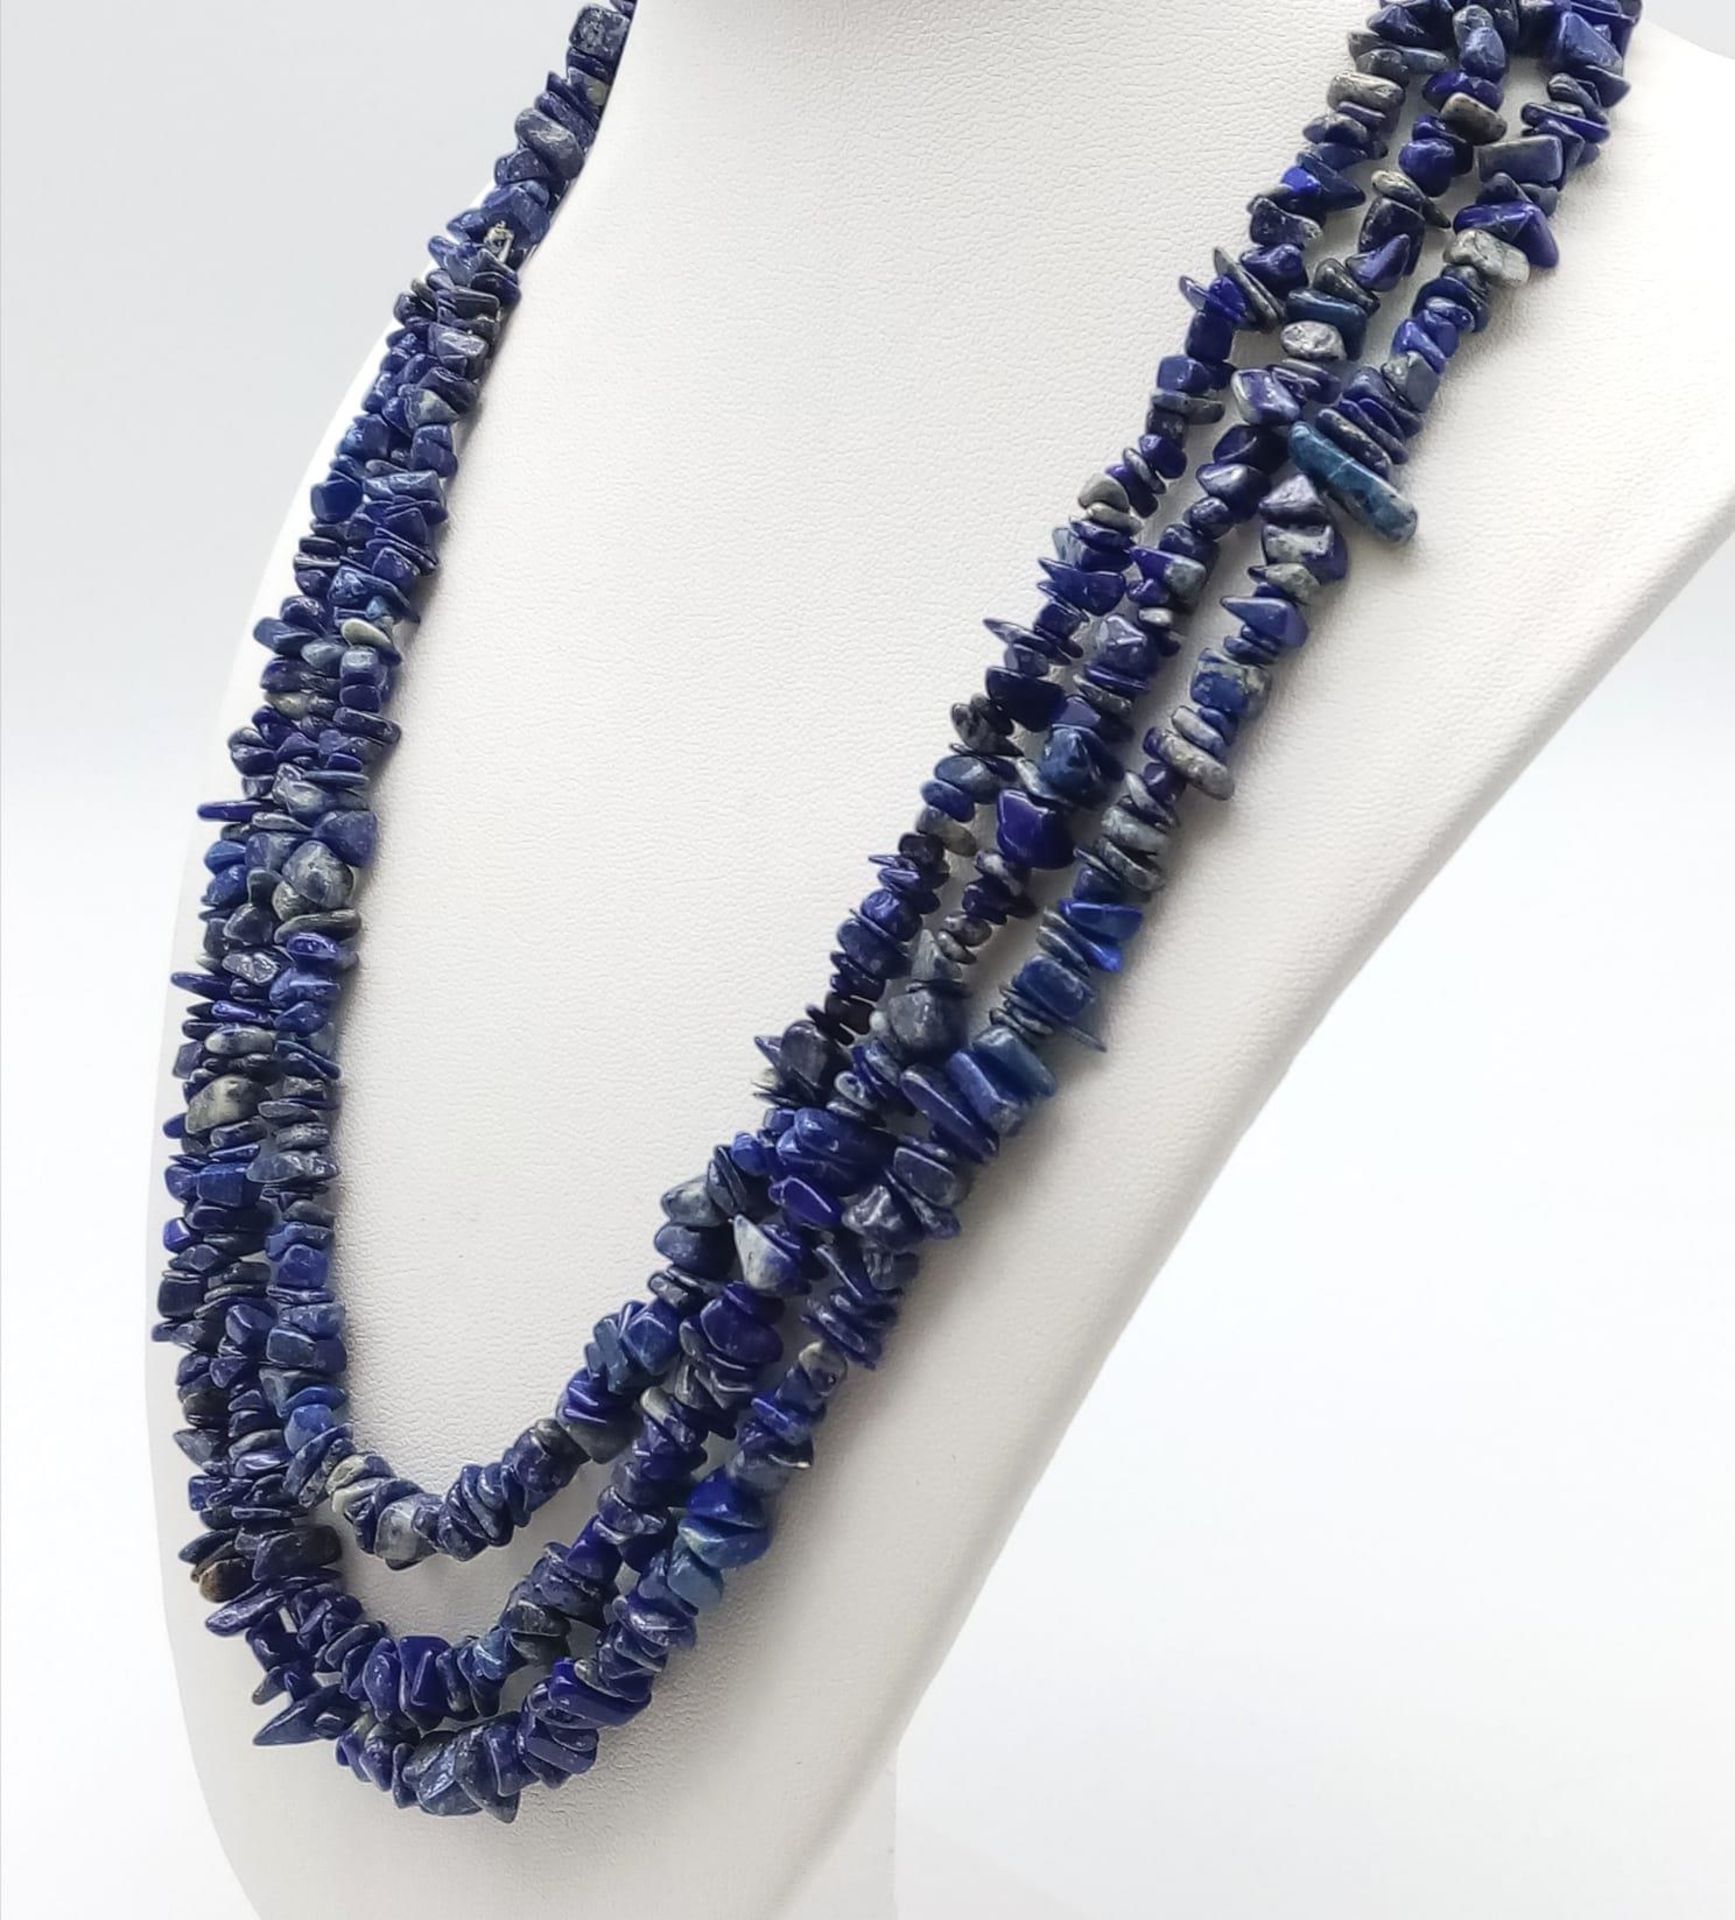 Two Natural Rough Gemstone Rope Length Necklaces. Lapis Lazuli and Turquoise. Both 150cm. - Image 4 of 6